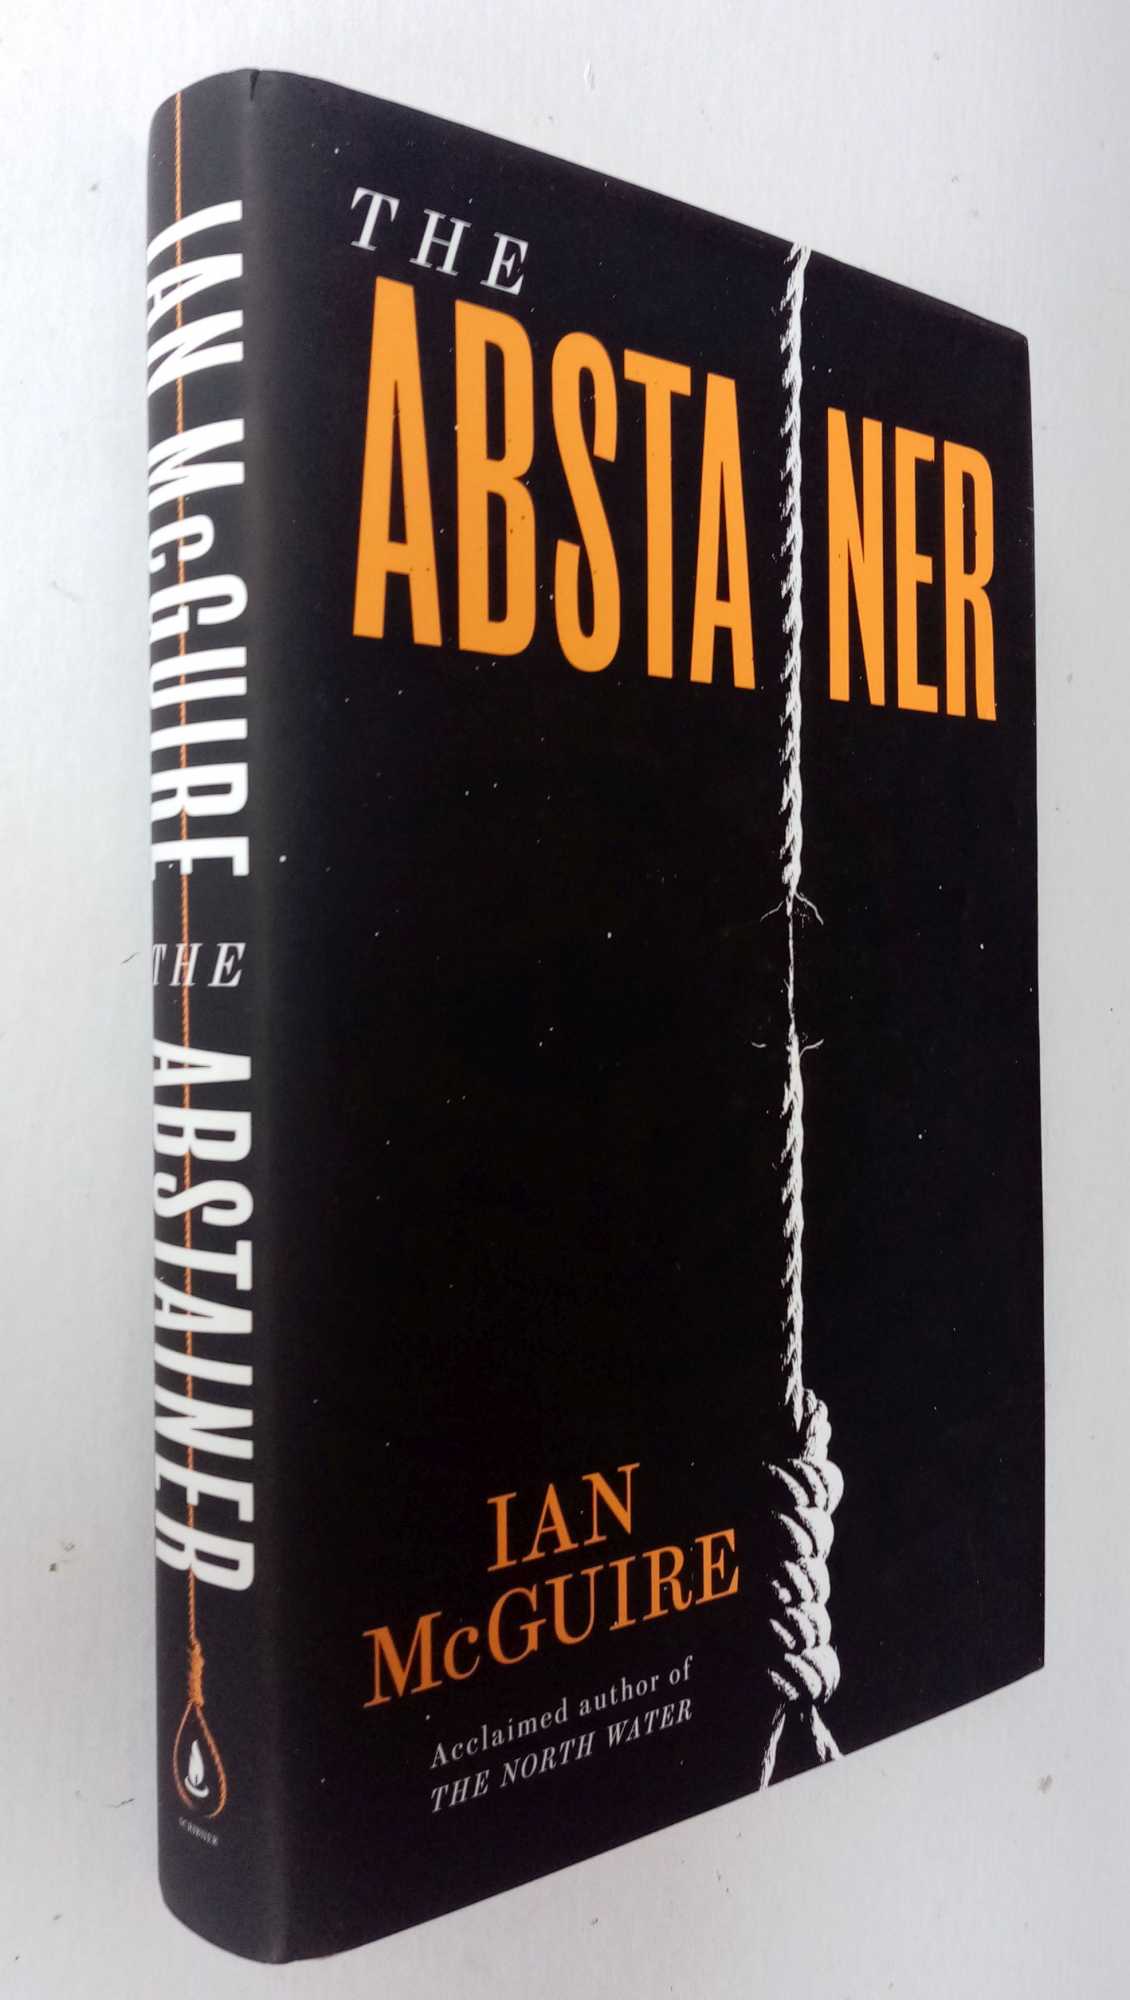 Ian McGuire - The Abstainer